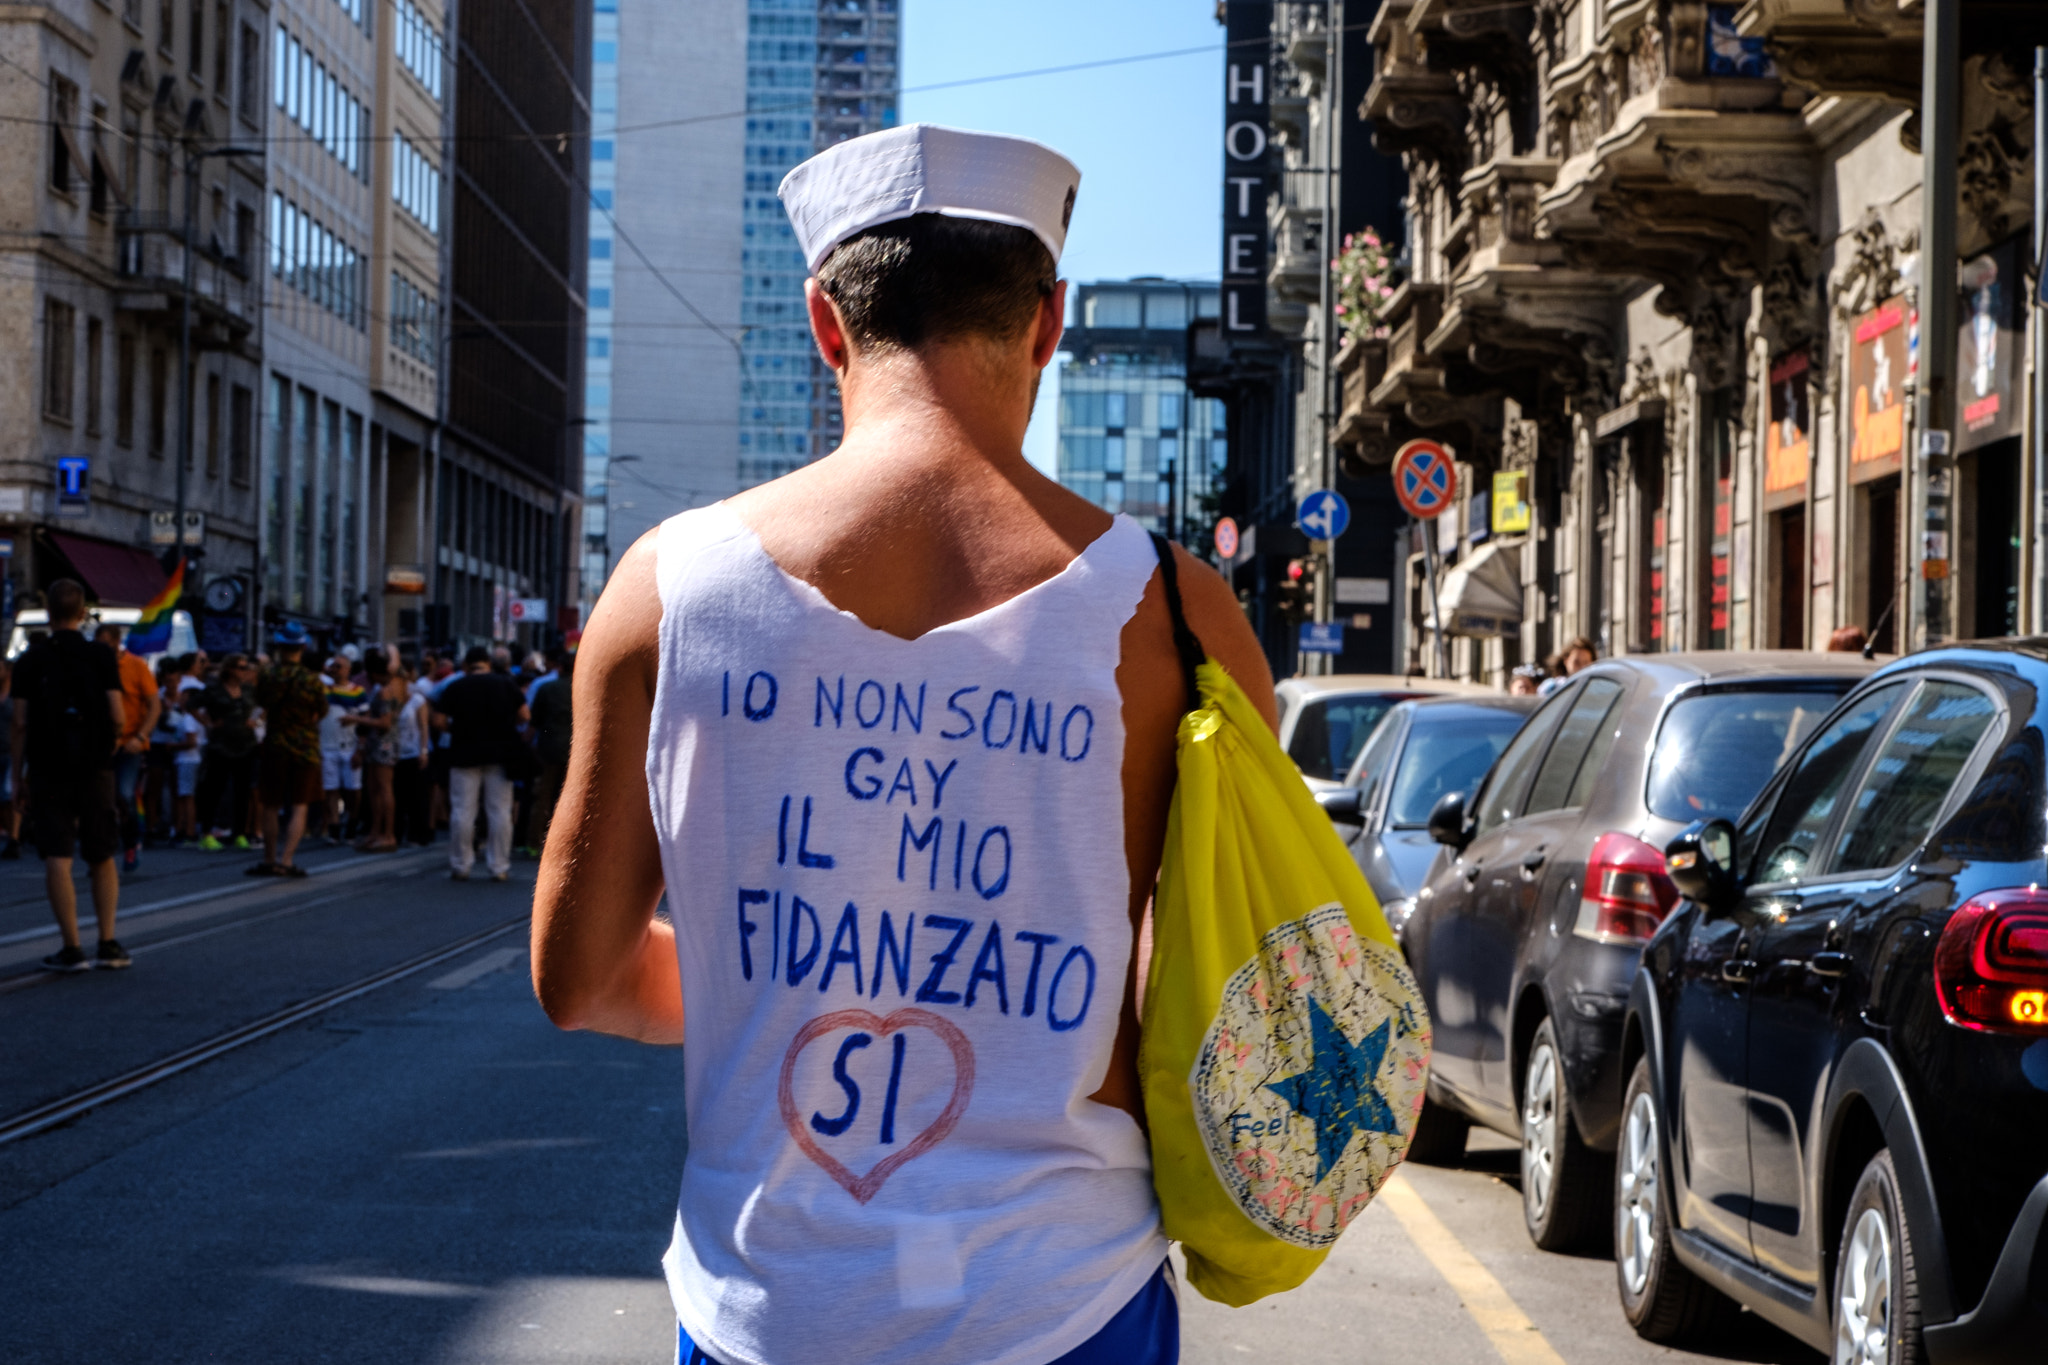 Milano Pride 2018, manifestation of gay, lesbians, asexuals, bisexuals, intersexual and queer...